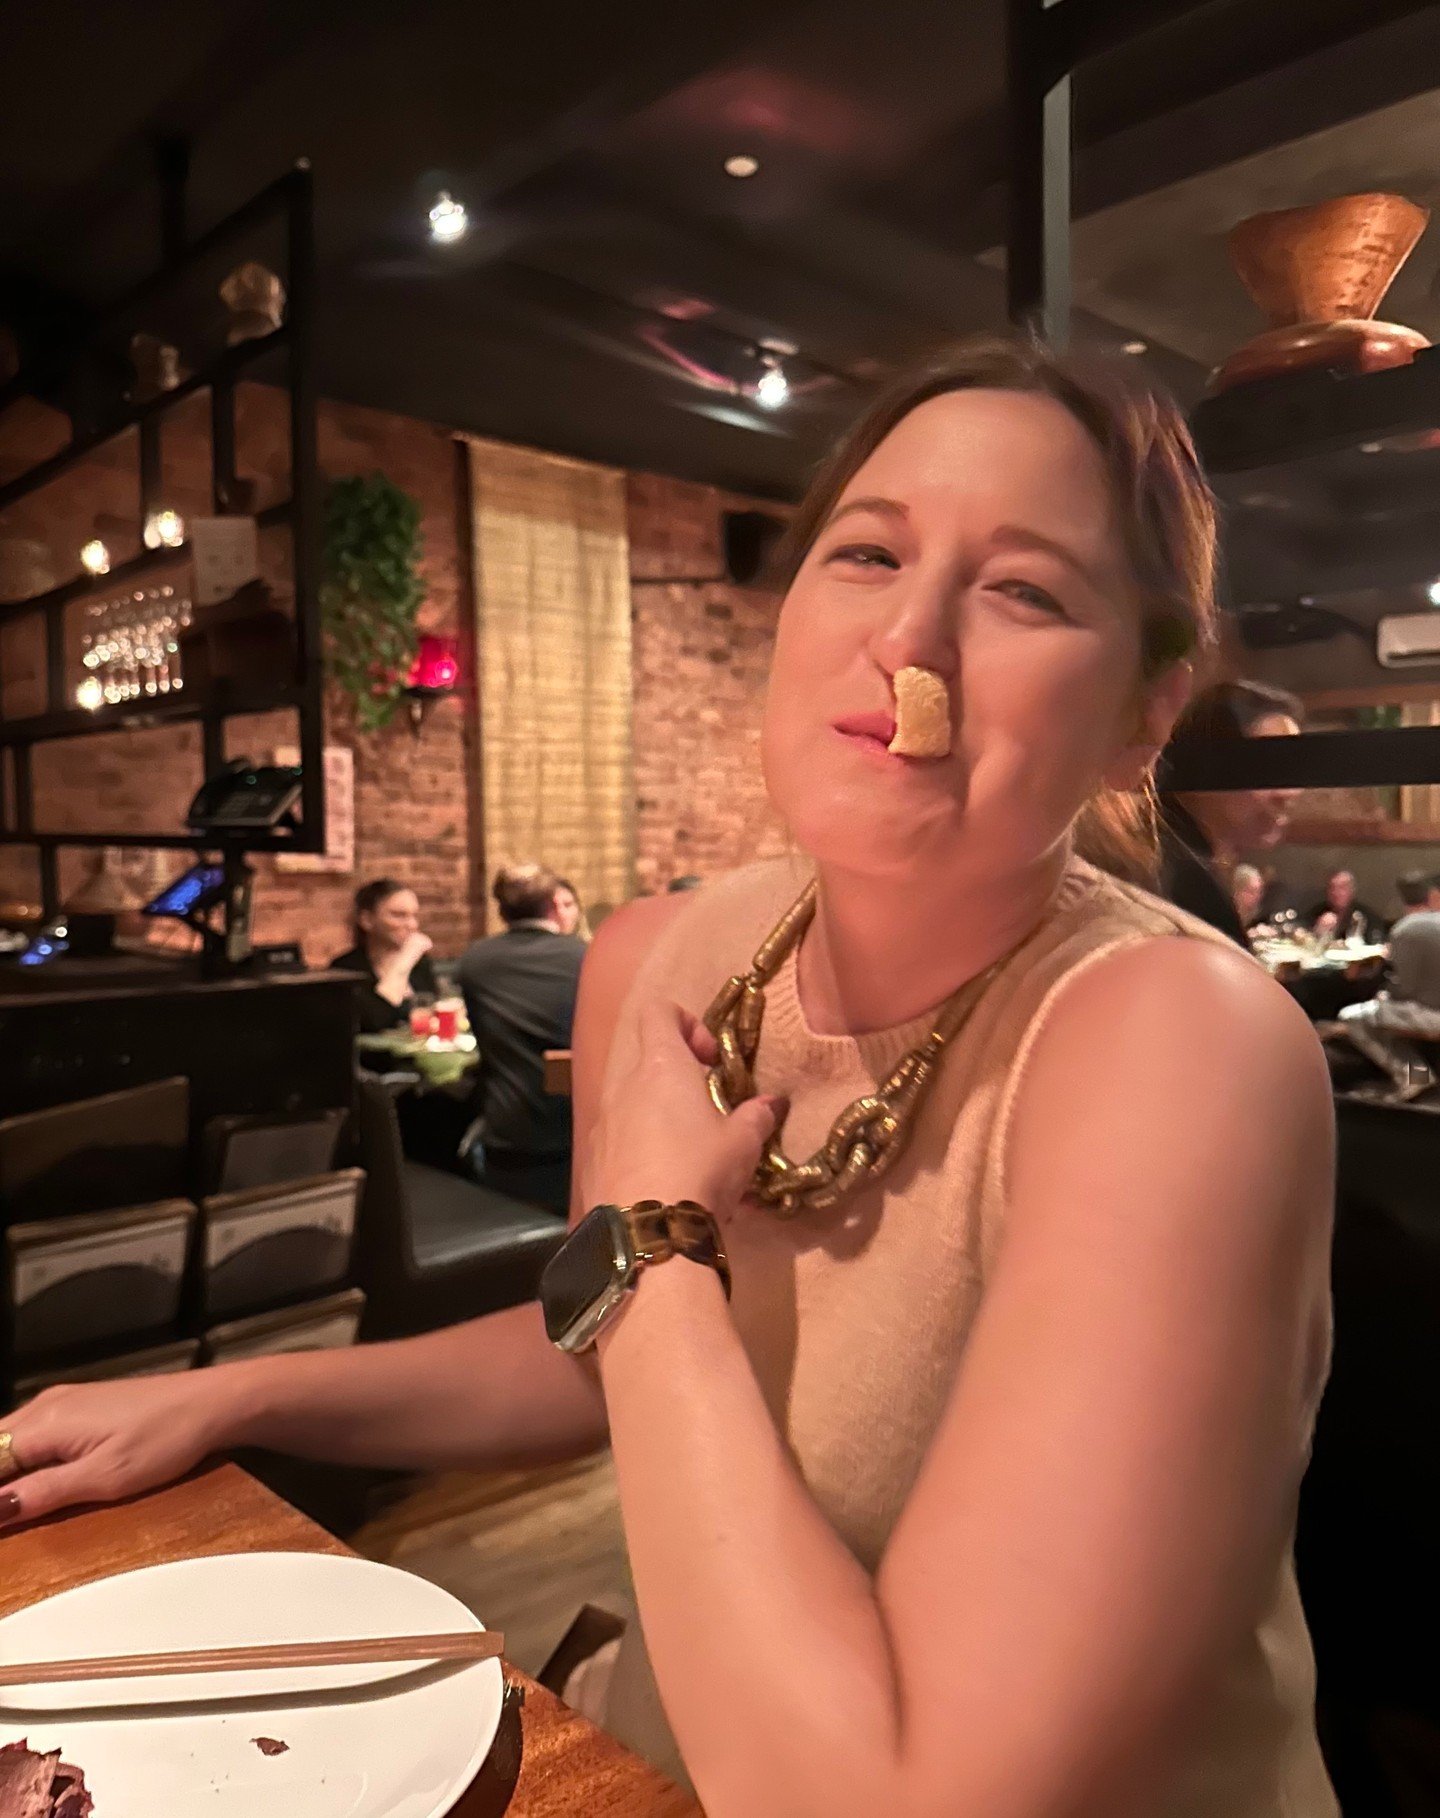 Happiest of birthdays to our very own sandwich connoisseur and mama to Ripley💕🥳 We hope your day is filled with endless martinis and relaxation!! @ichibanhapa